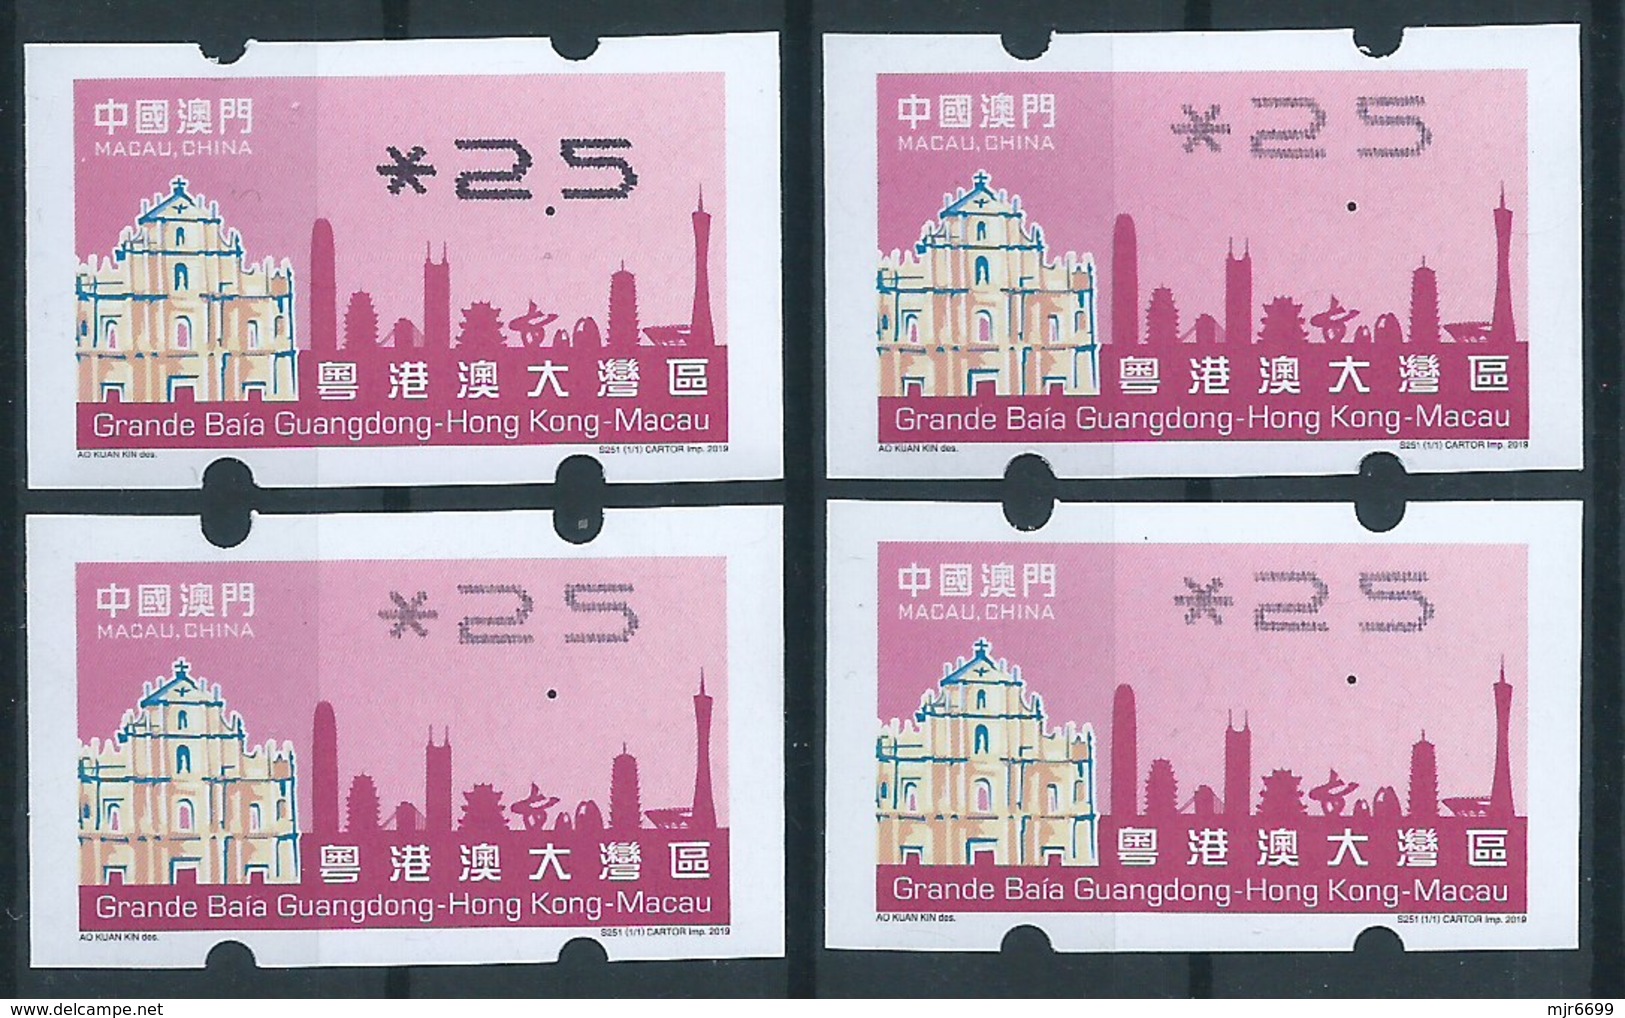 MACAU 2019 GUANDGONG, H.K. & MACAU GREAT BAY ATM LABELS 2.50PATACAS SHIFTED UP PRINT LOT OF 3, NORMAL FOR COMPARE - Automatenmarken